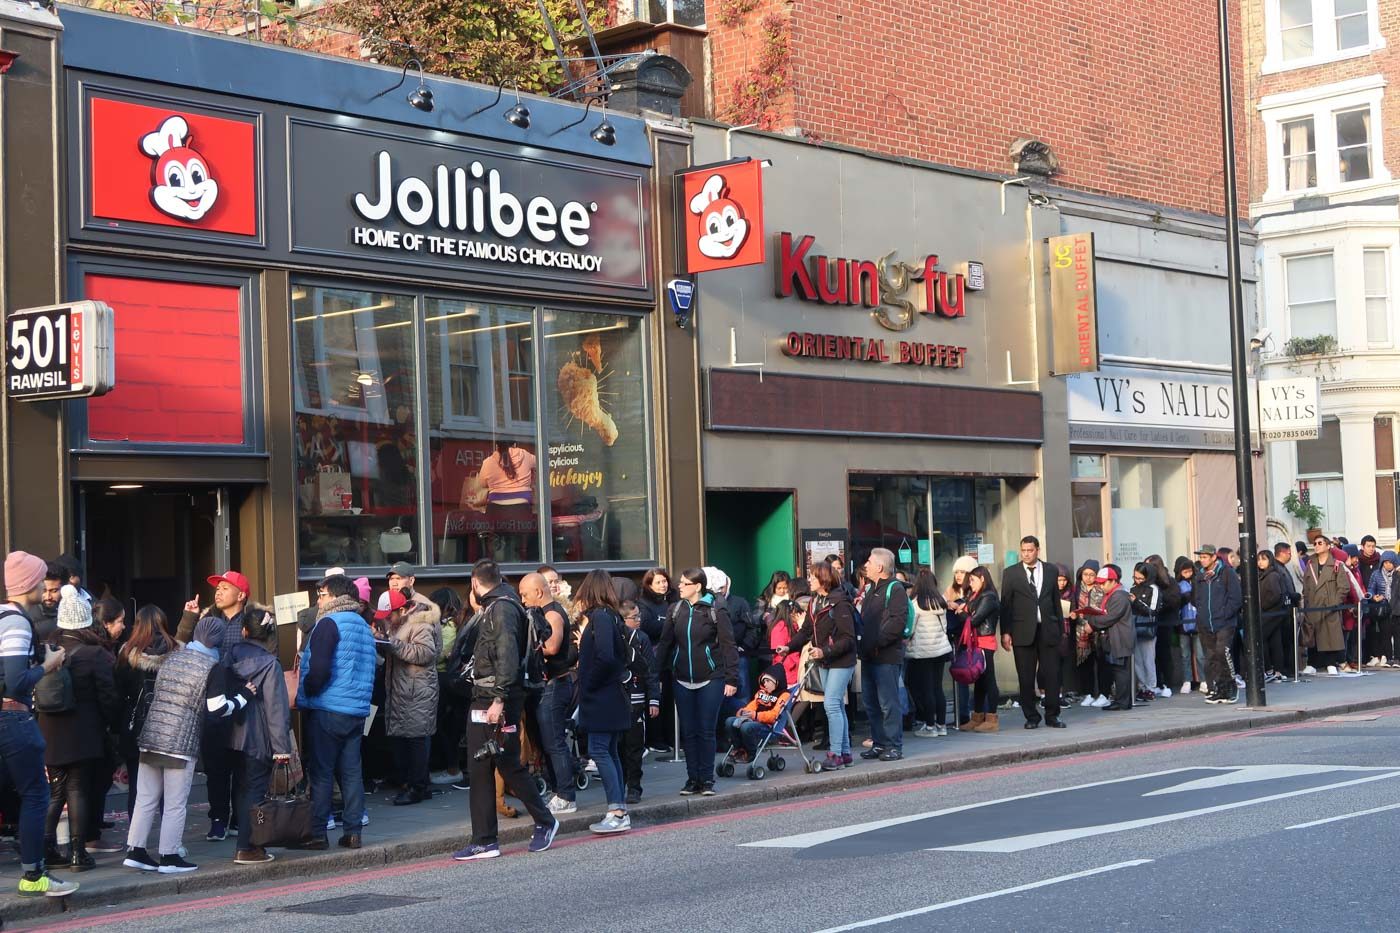 IN PHOTOS: Why people braved long lines for Jollibee’s first UK store